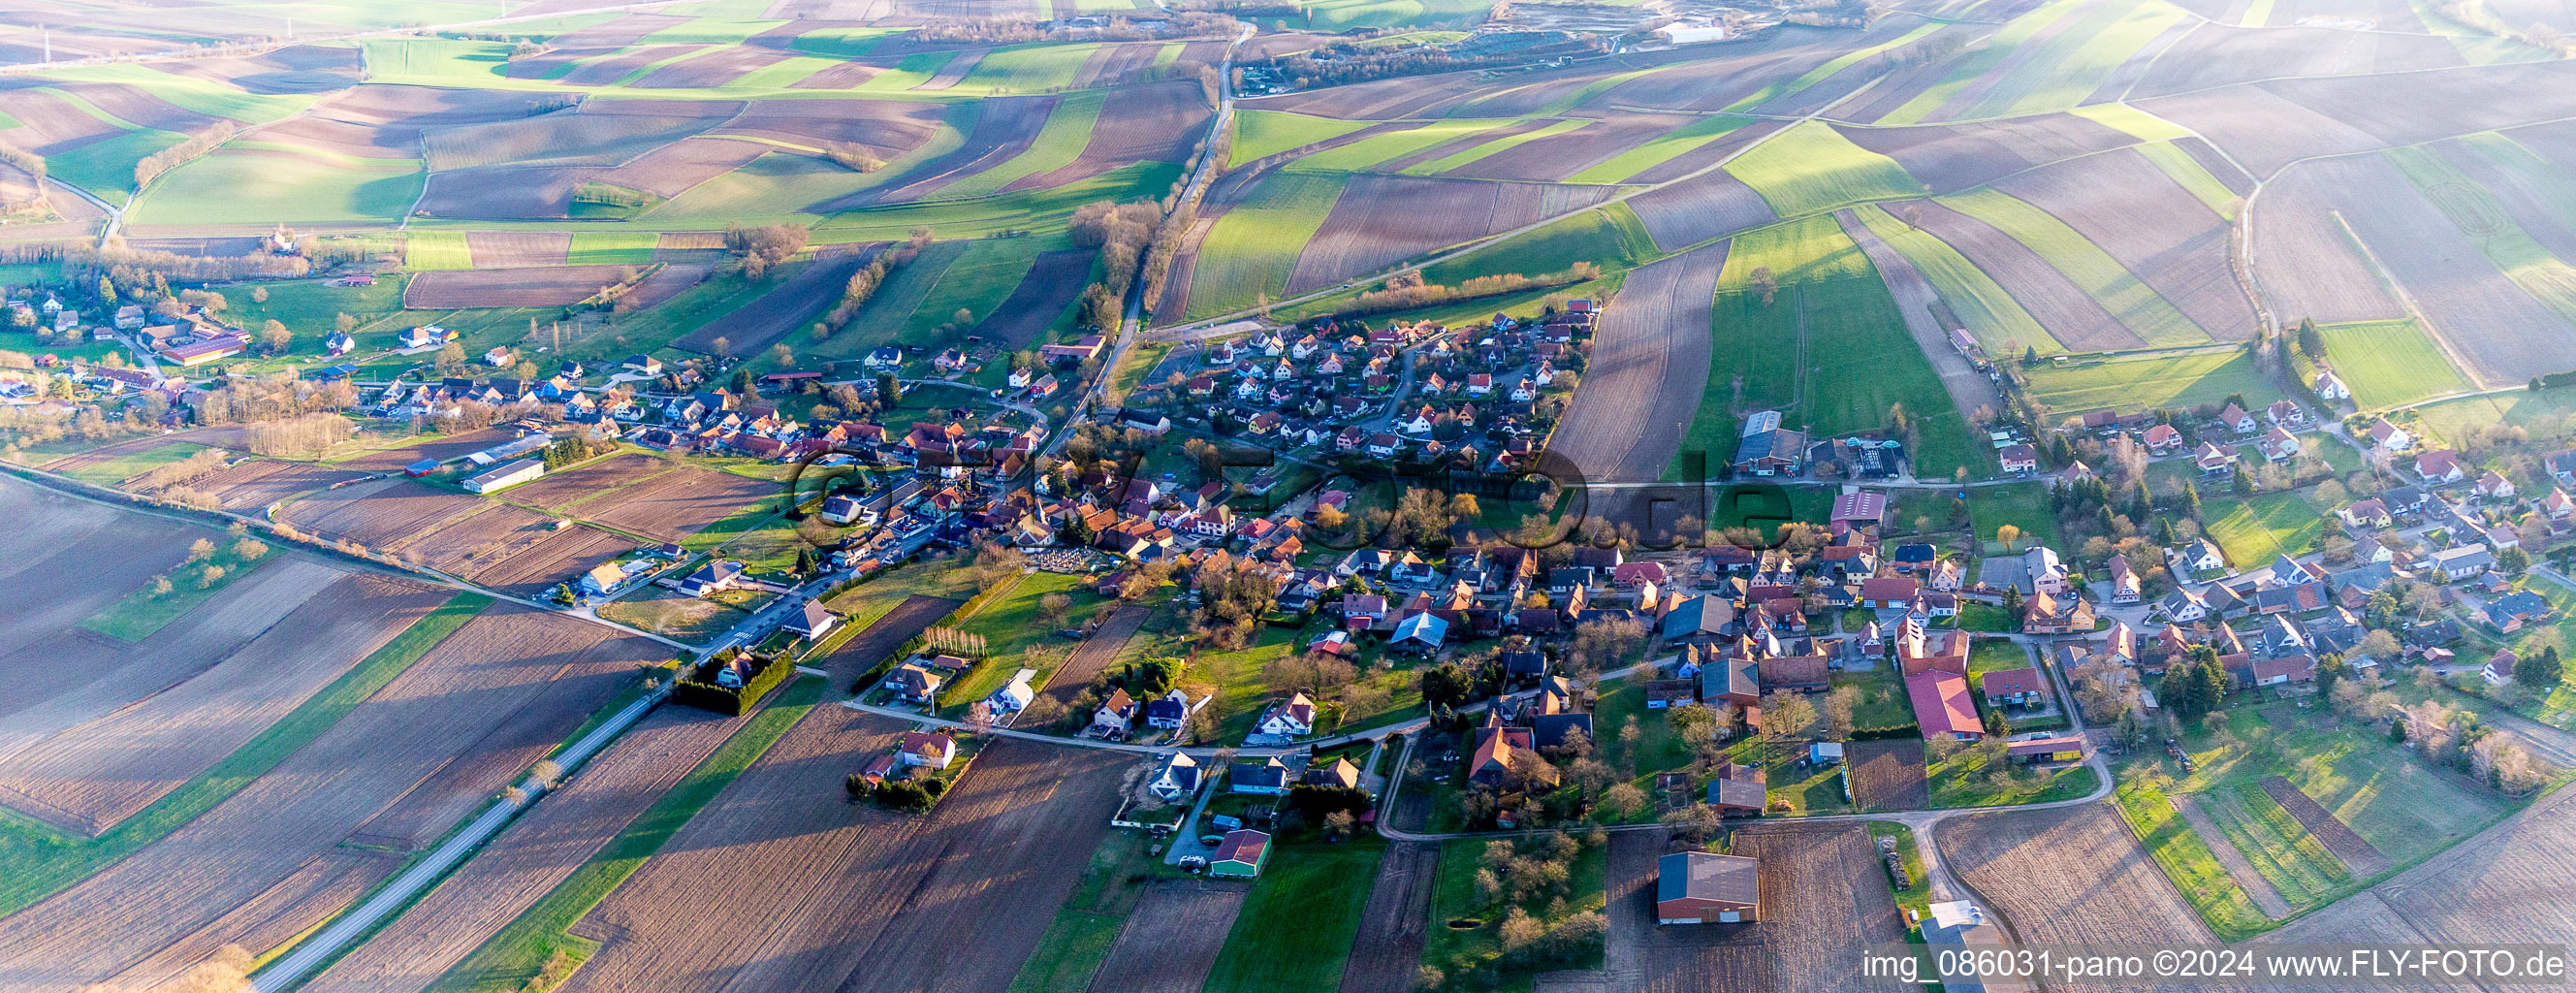 Village - view on the edge of agricultural fields and farmland in Wintzenbach in Grand Est, France